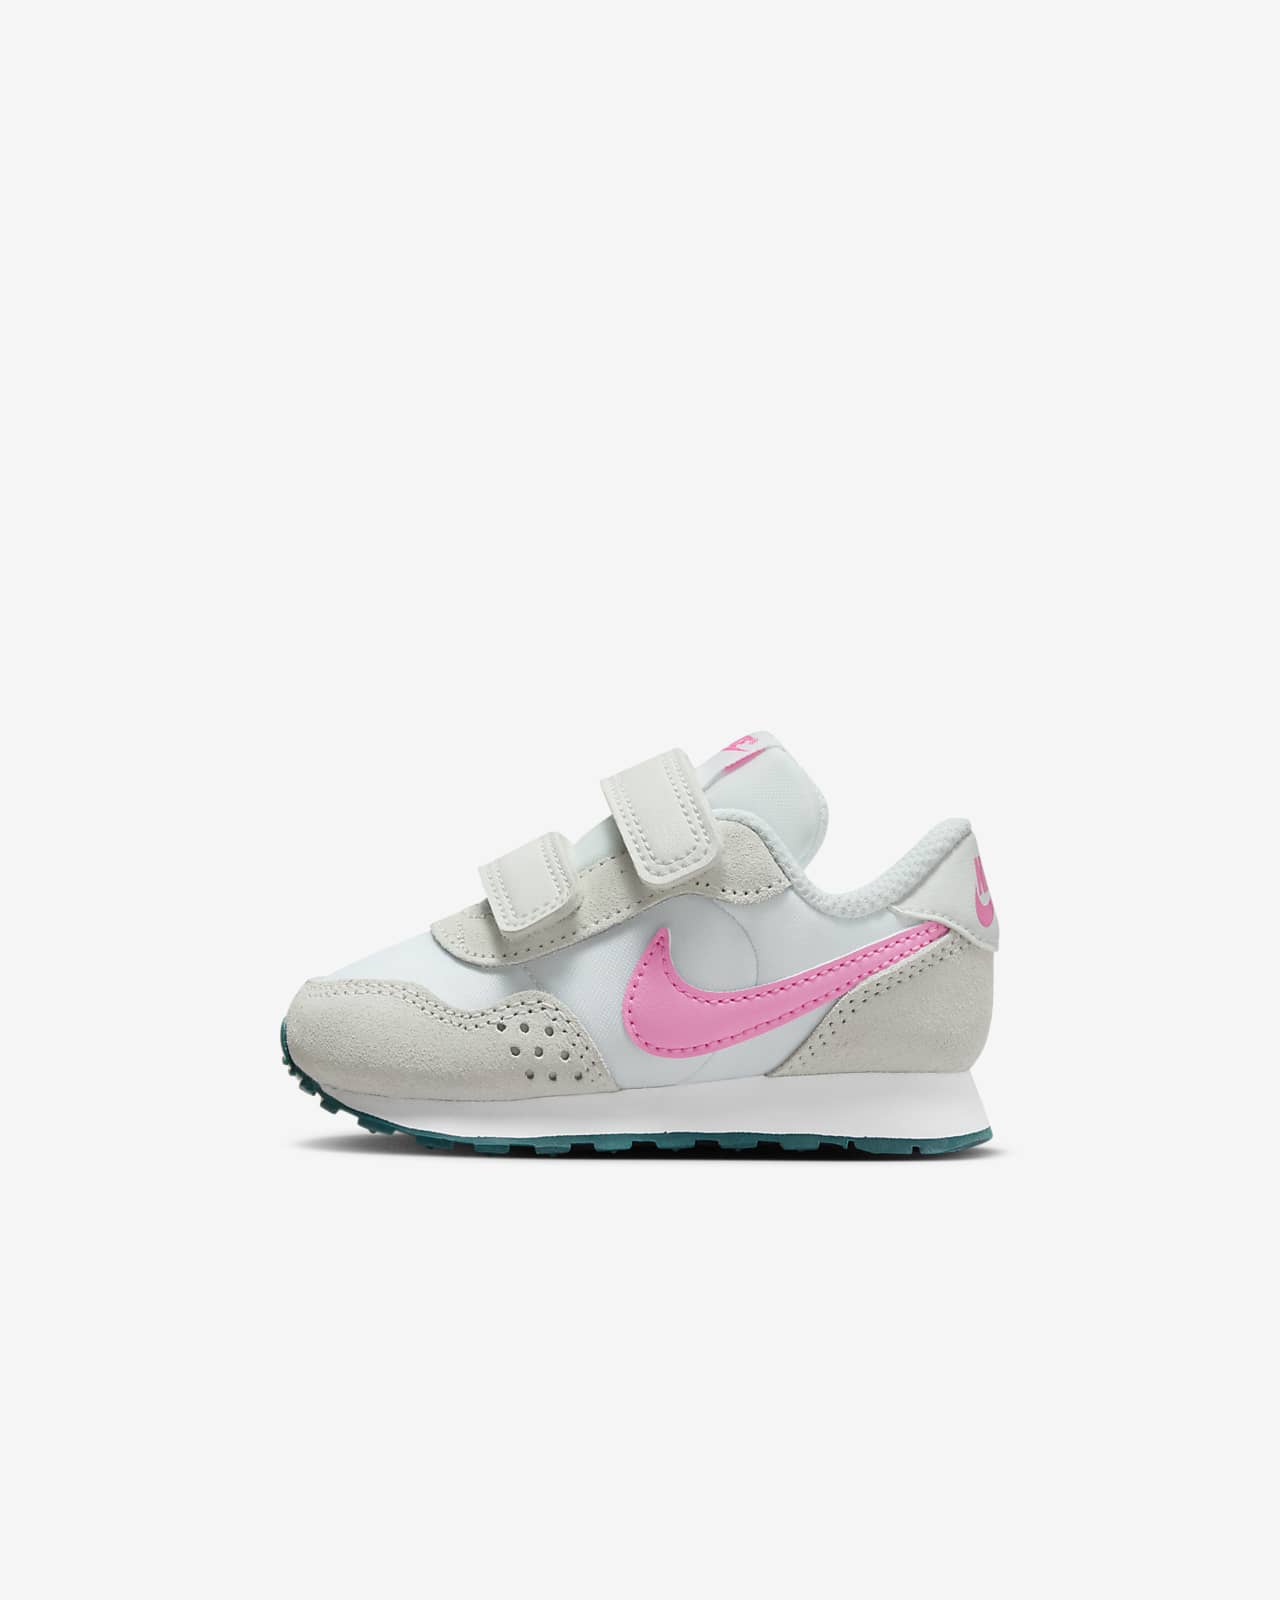 Nike MD Valiant ID Shoe. Baby Nike Toddler and